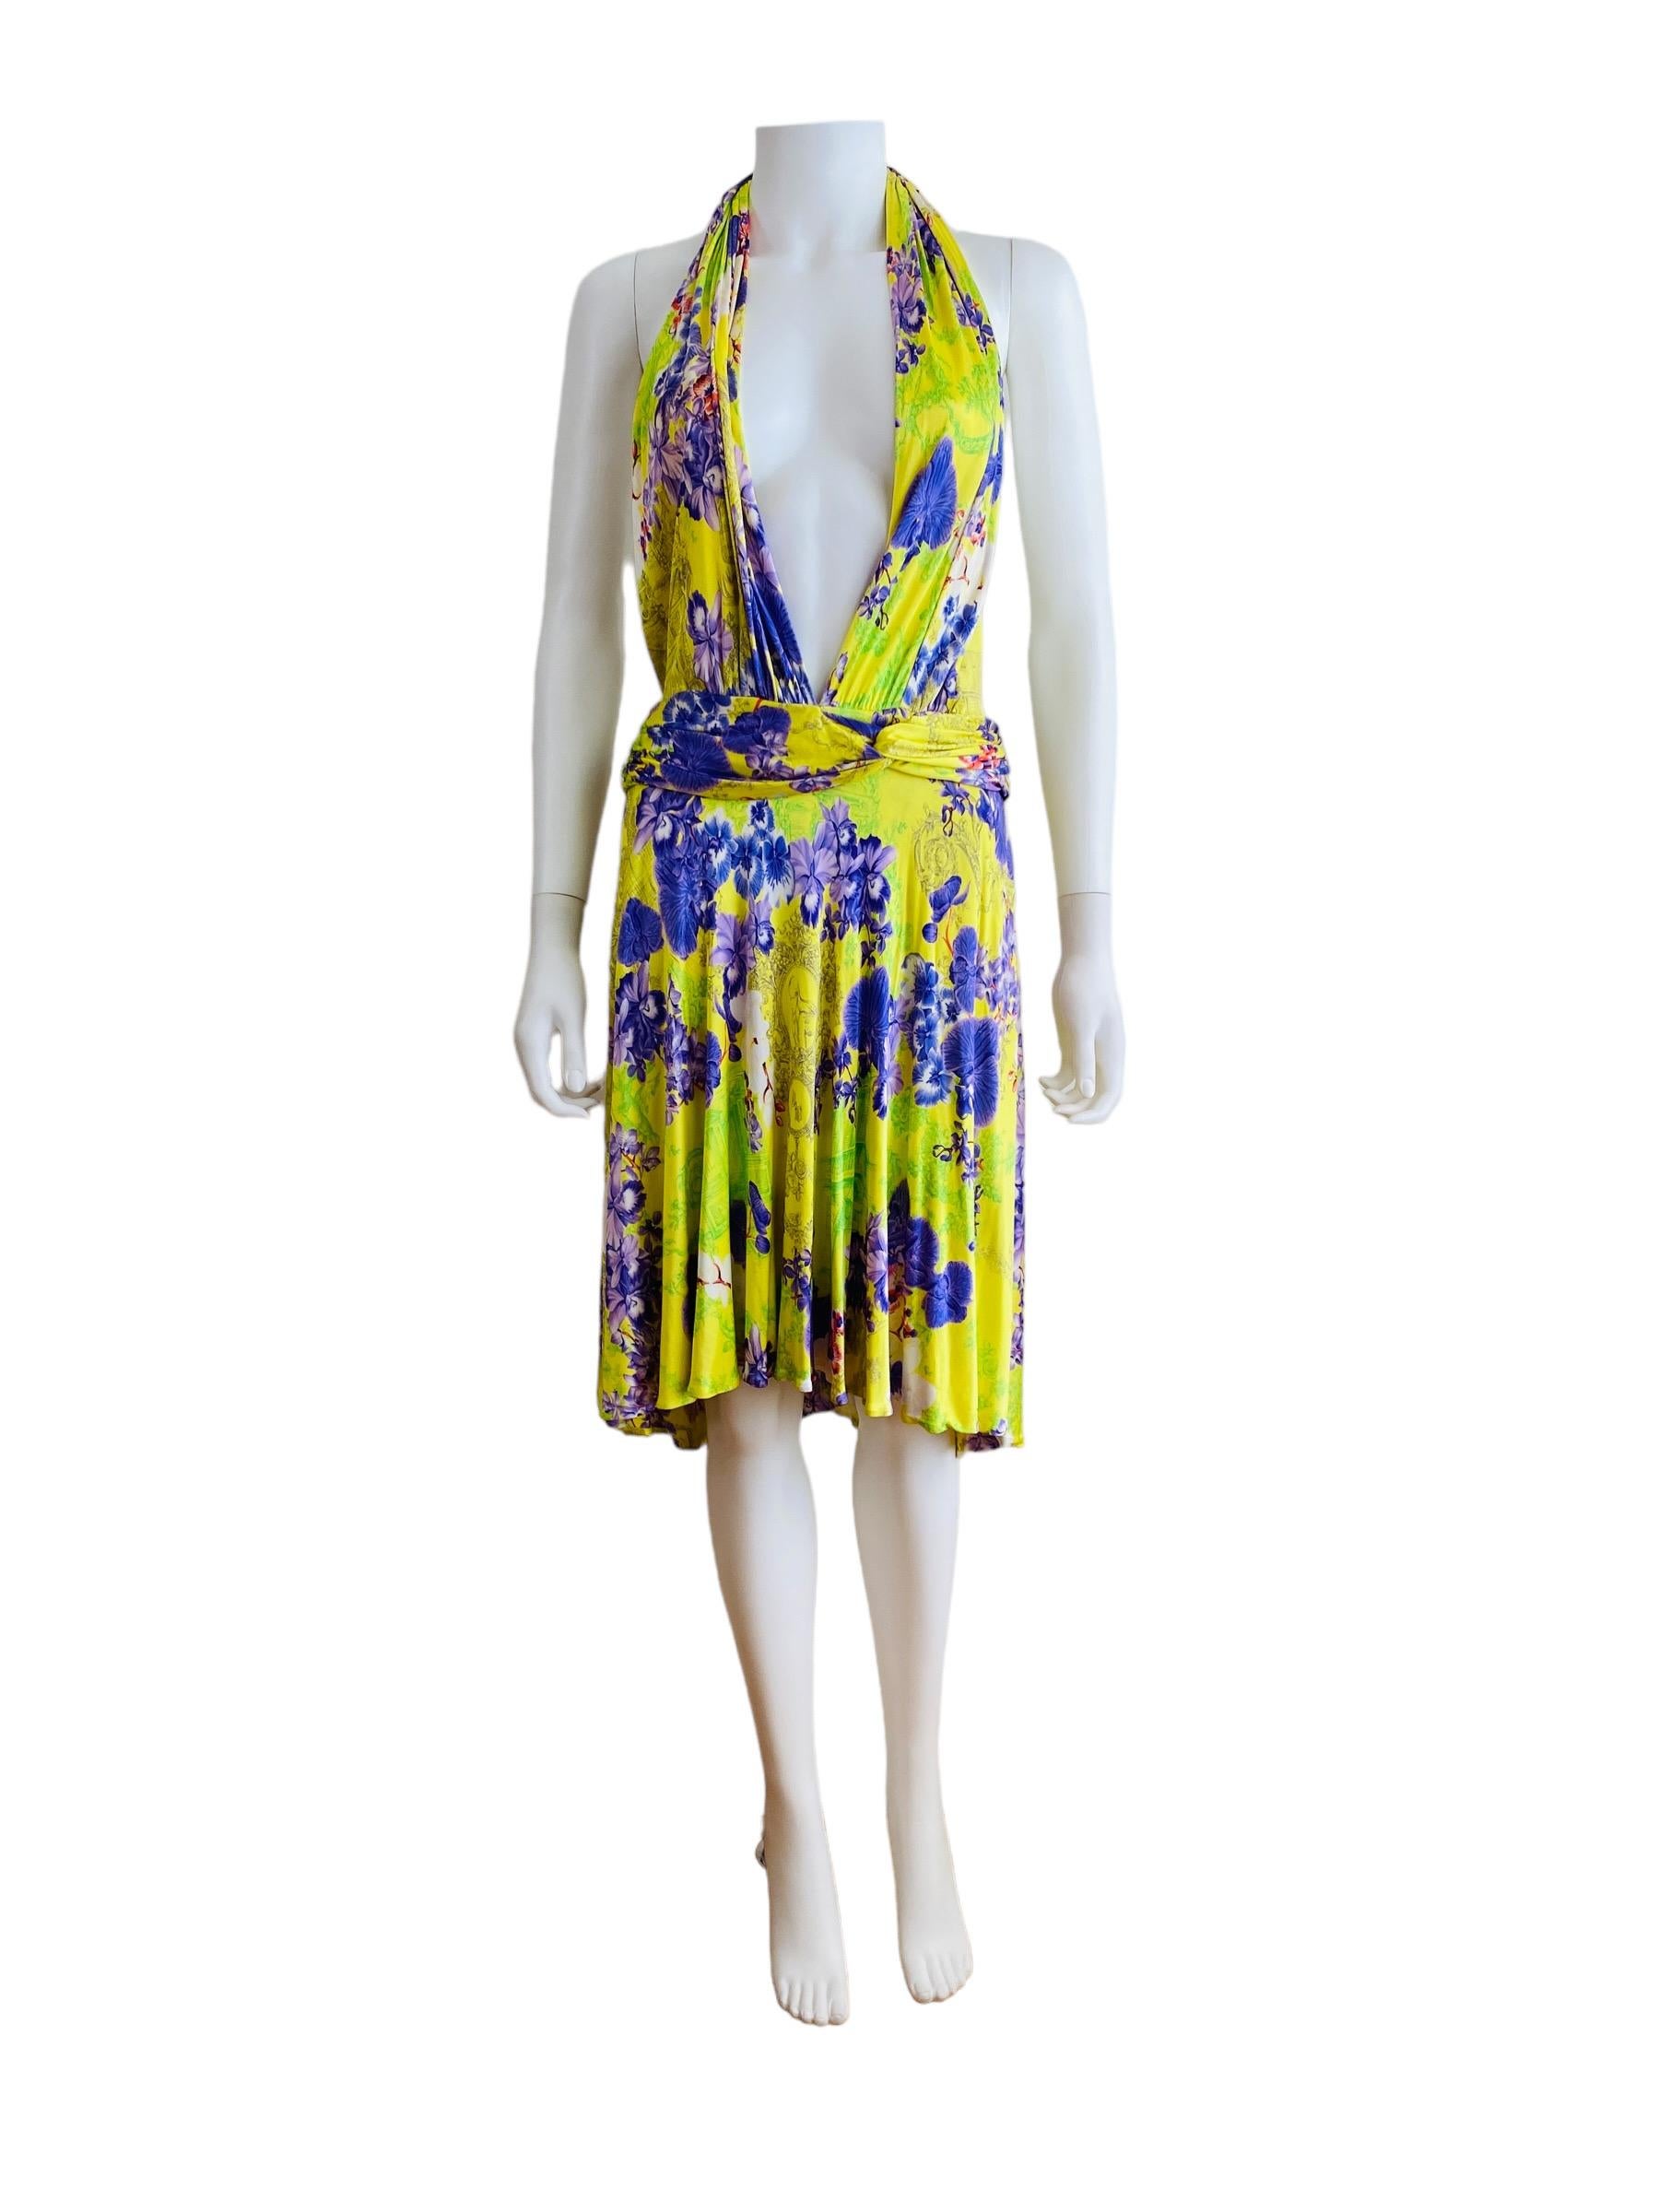 S/S 2004 Versace Dress
Bold + bright slinky neon yellow fabric with oversized toile + purple orchid floral print
Halter style deep plunging neckline w/full coverage fabric on the bust if so desired, fabric can be gathered or not on the bust
Fitted